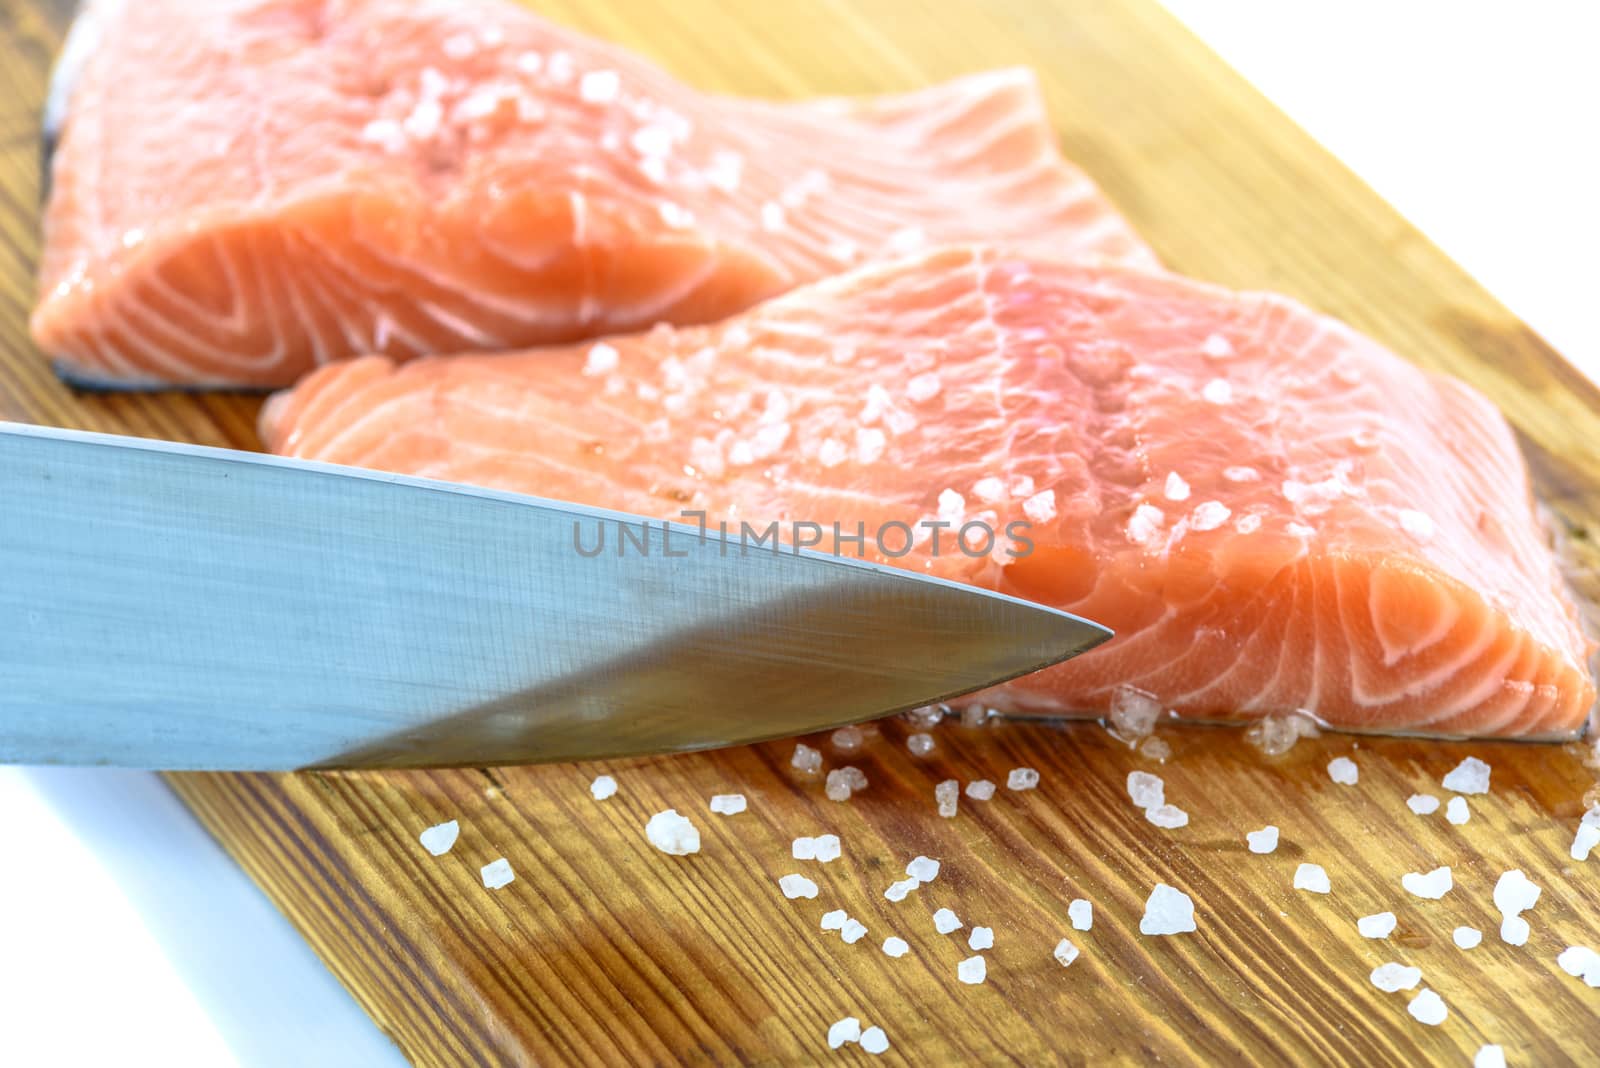 Patches of fresh salmon marinated with sea salt and cutting on a wooden board